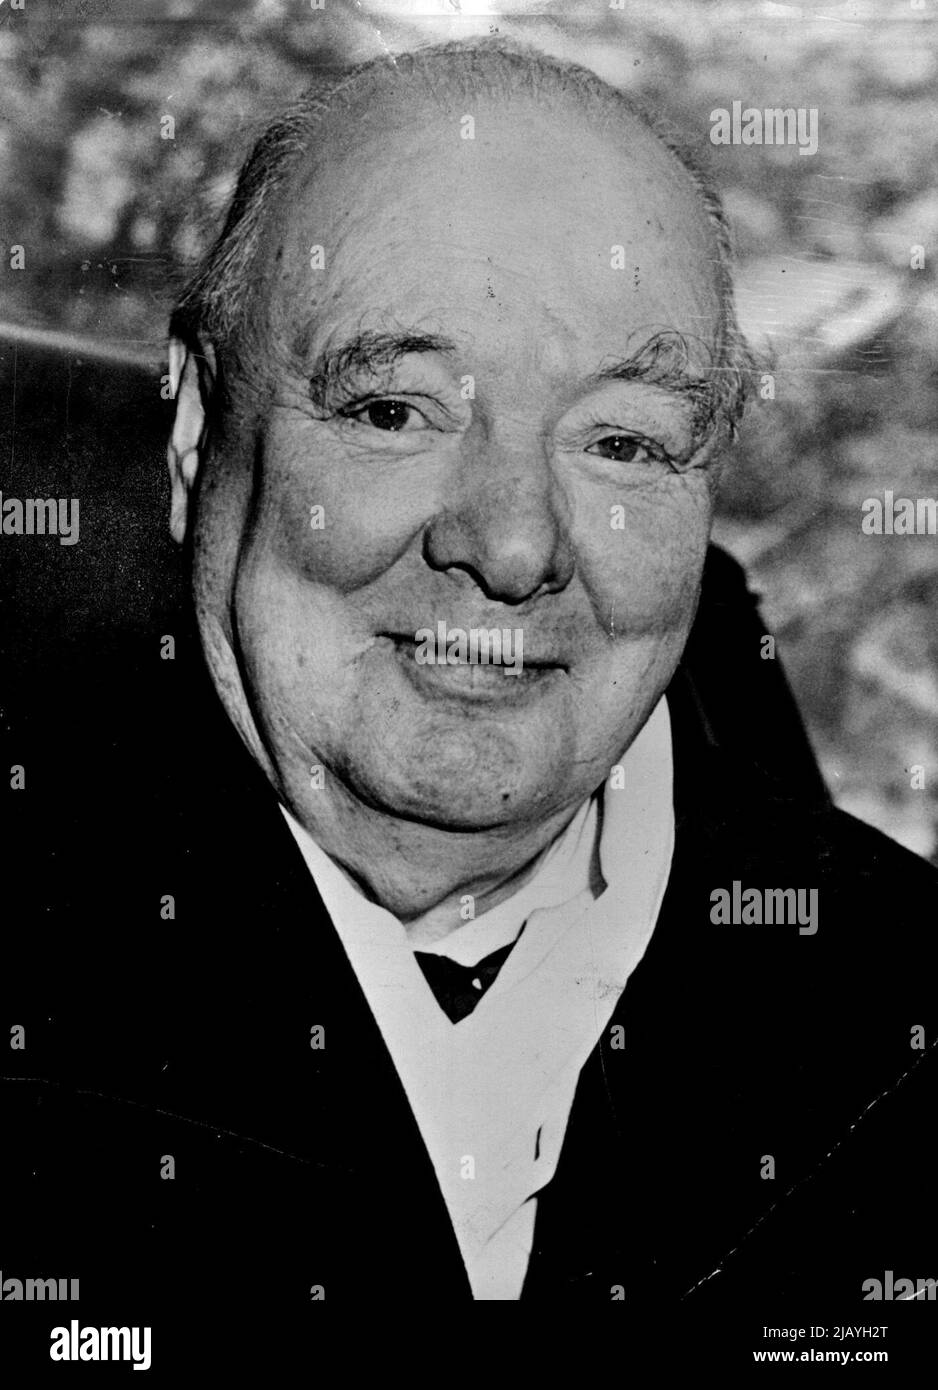 The Rt. Hon. Sir Winston Churchill, P.C., O.M., C.H.,M.P.: Churchill full face: The paternal smile of kindness and wisdom conceals the defiance and steely resolution that characterized the Churchill of World War II. - This photograph of Sir Winston was taken in January, 1953, during his visit to Washington. May 25, 1954. (Photo by Camera Press). Stock Photo